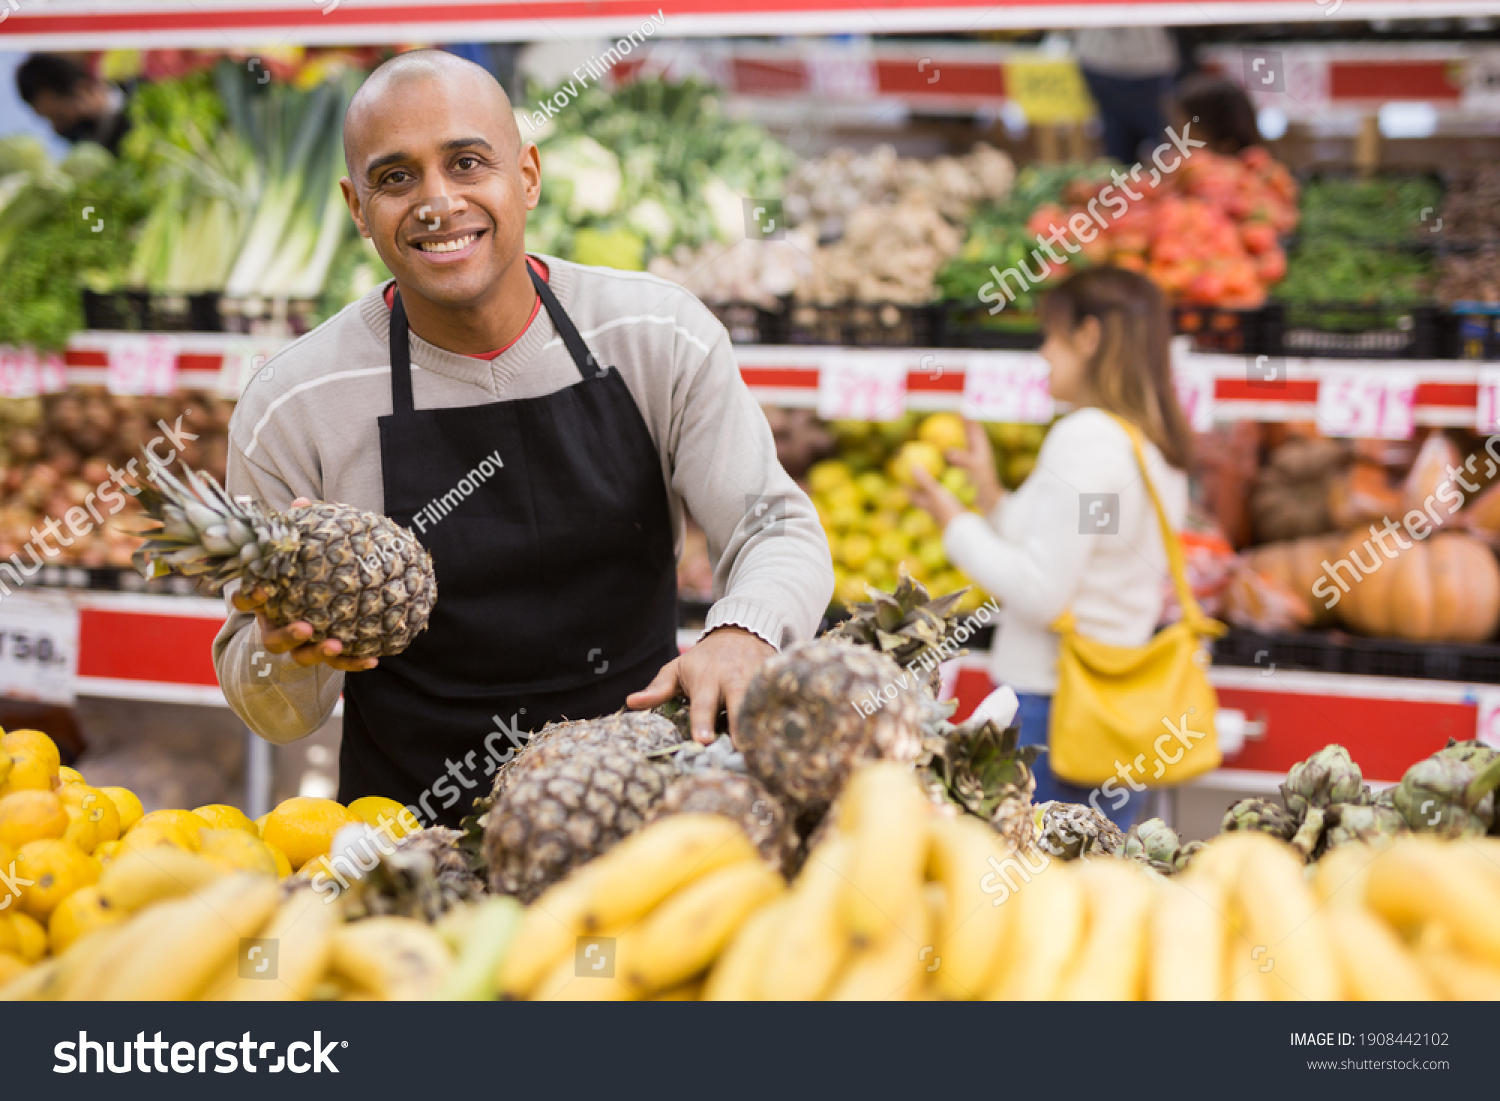 Portrait of latino-american worker in supermarket with pineapples #1908442102